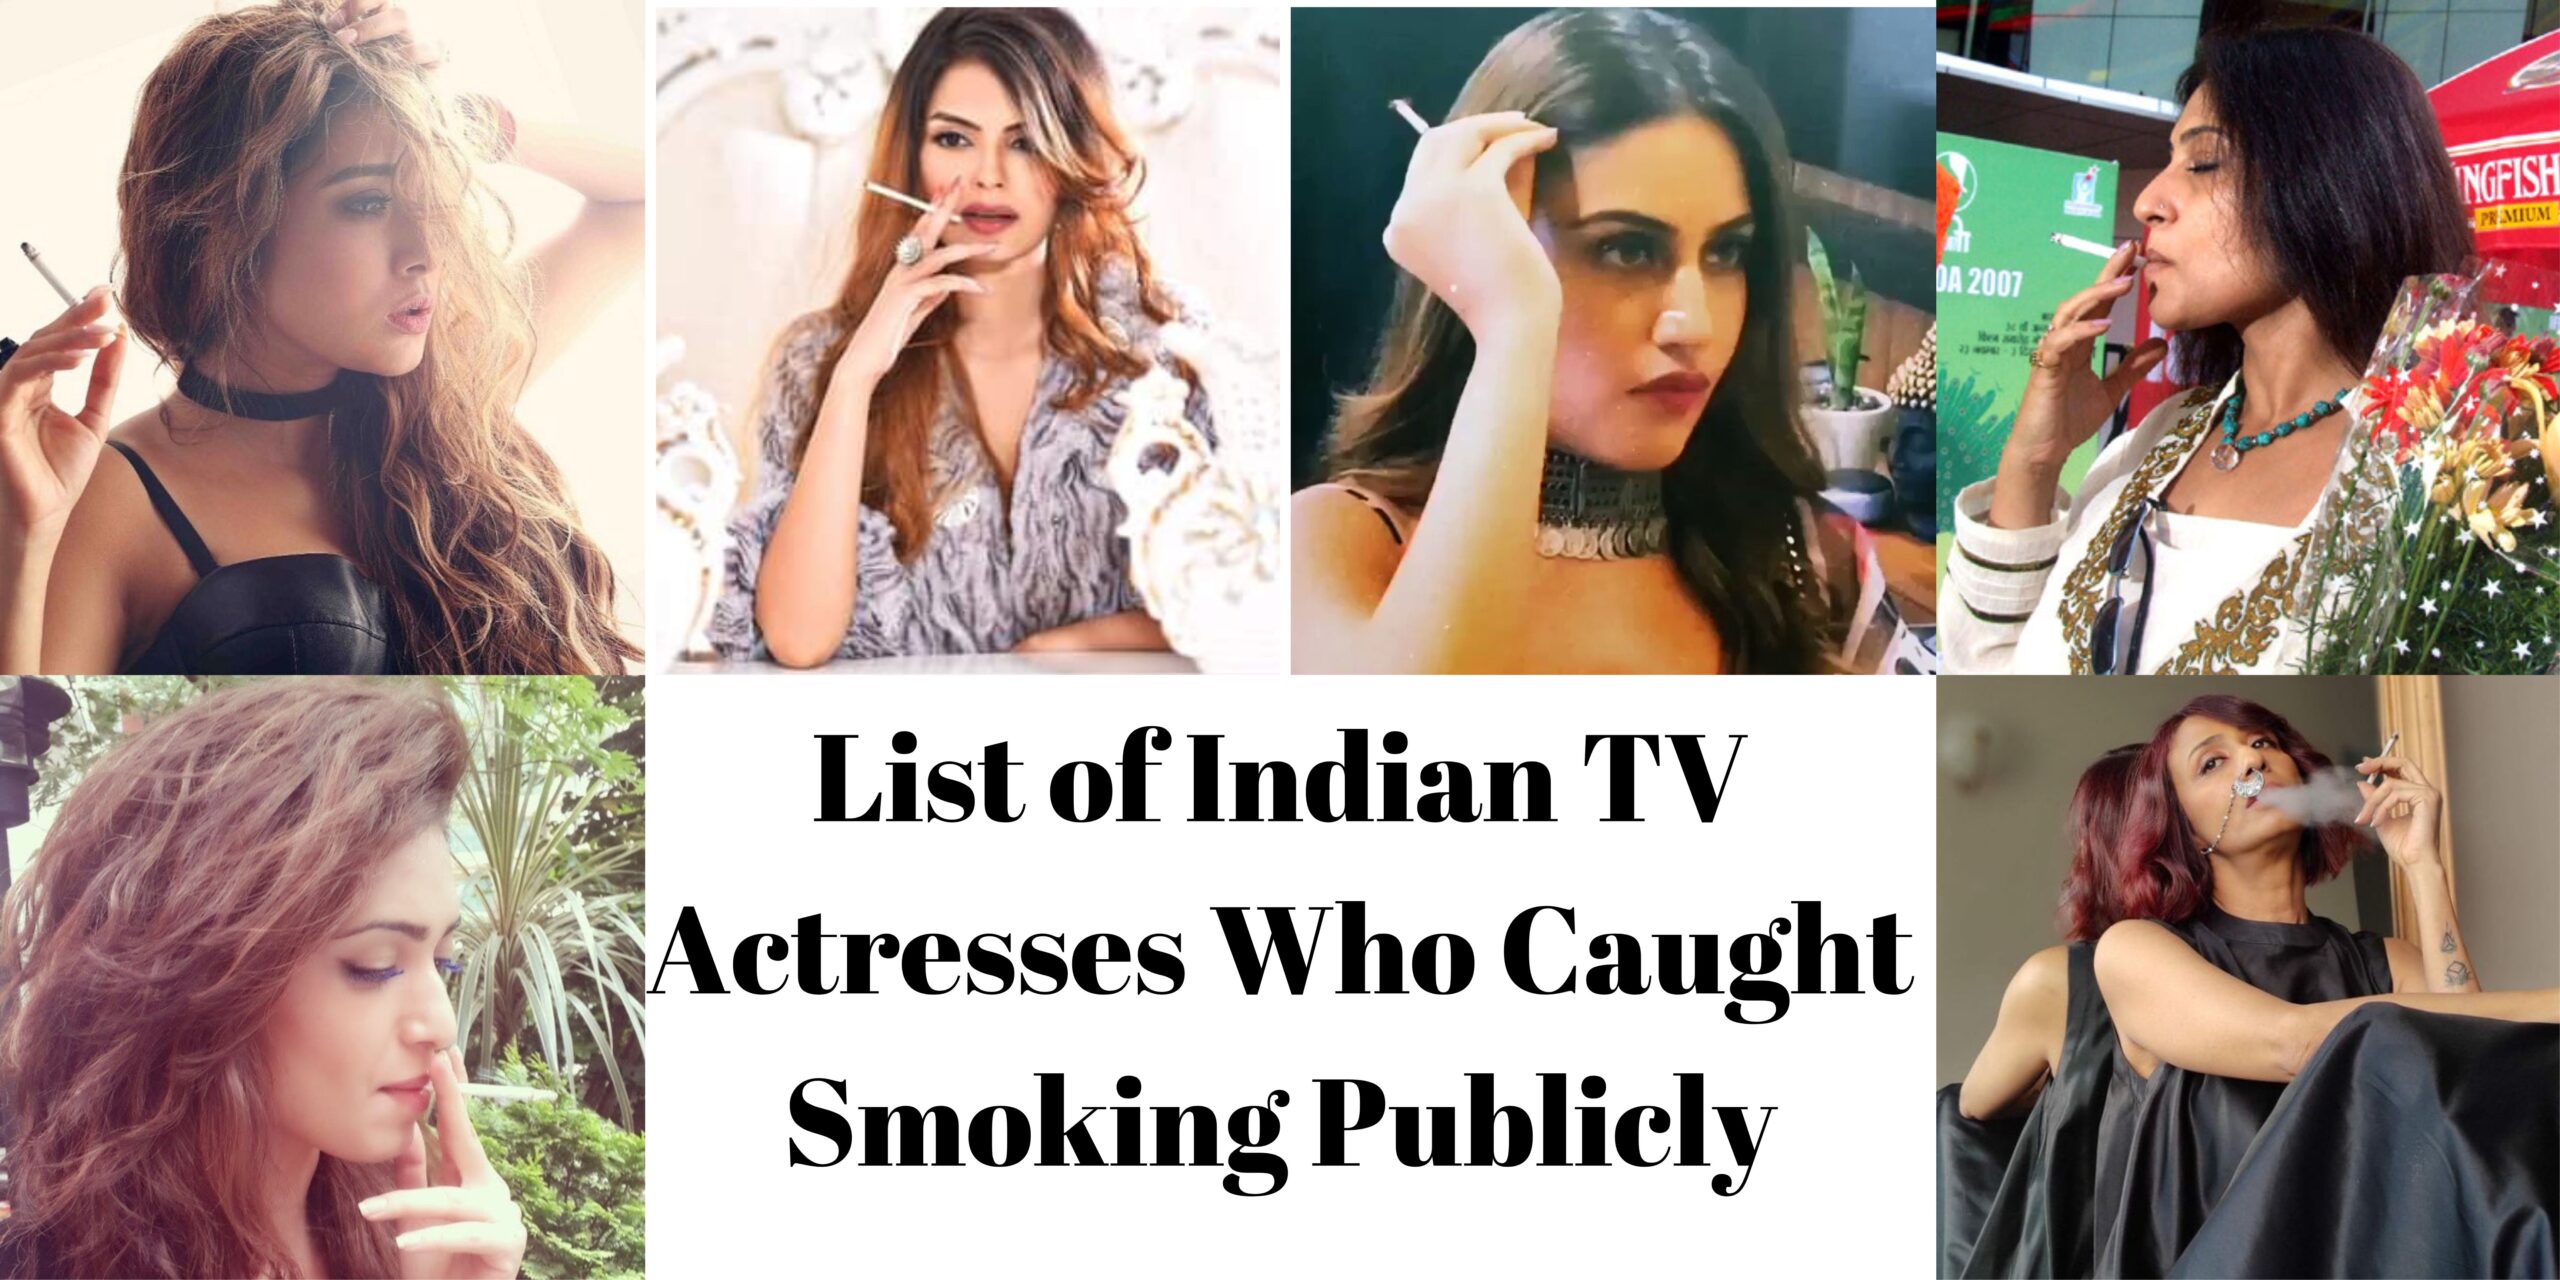 List of Indian TV Actresses Who Caught Smoking Publicly